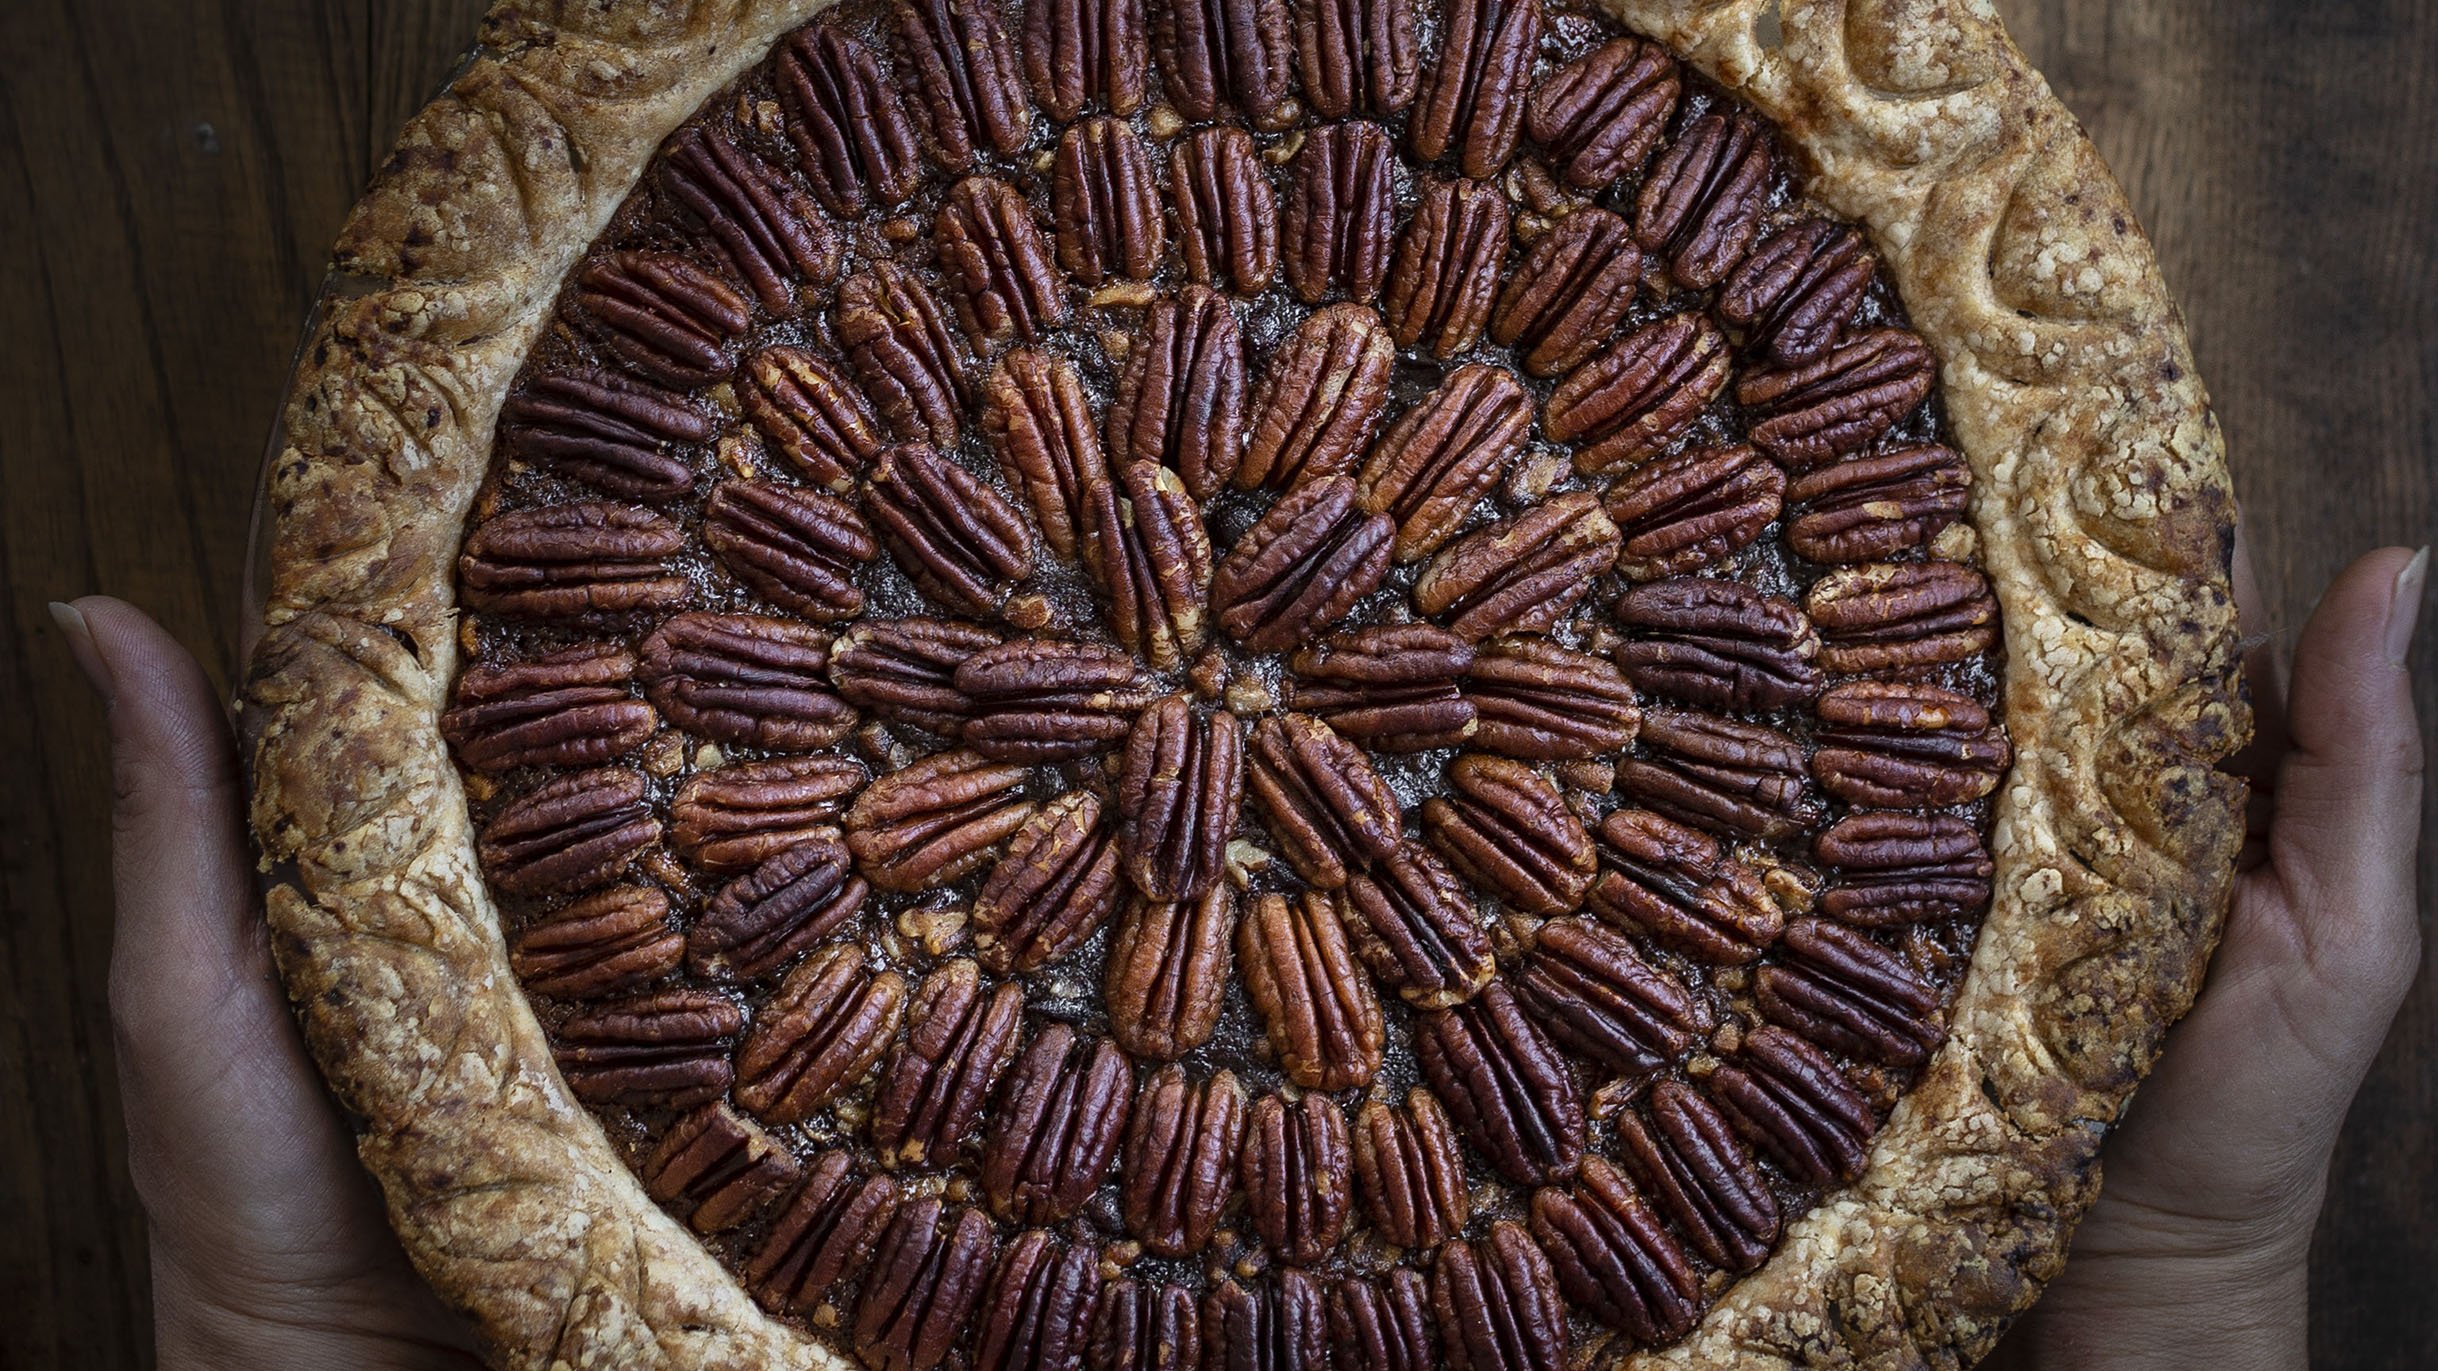 The Korean Vegan_Pecan Paht Pie_recipe Excerpted from Korean Vegan Copyright © 2021 by Joanne Lee Molinaro. Published by Avery, an imprint of Penguin Random House LLC. Reproduced by arrangement with the Publisher. All rights reserved.